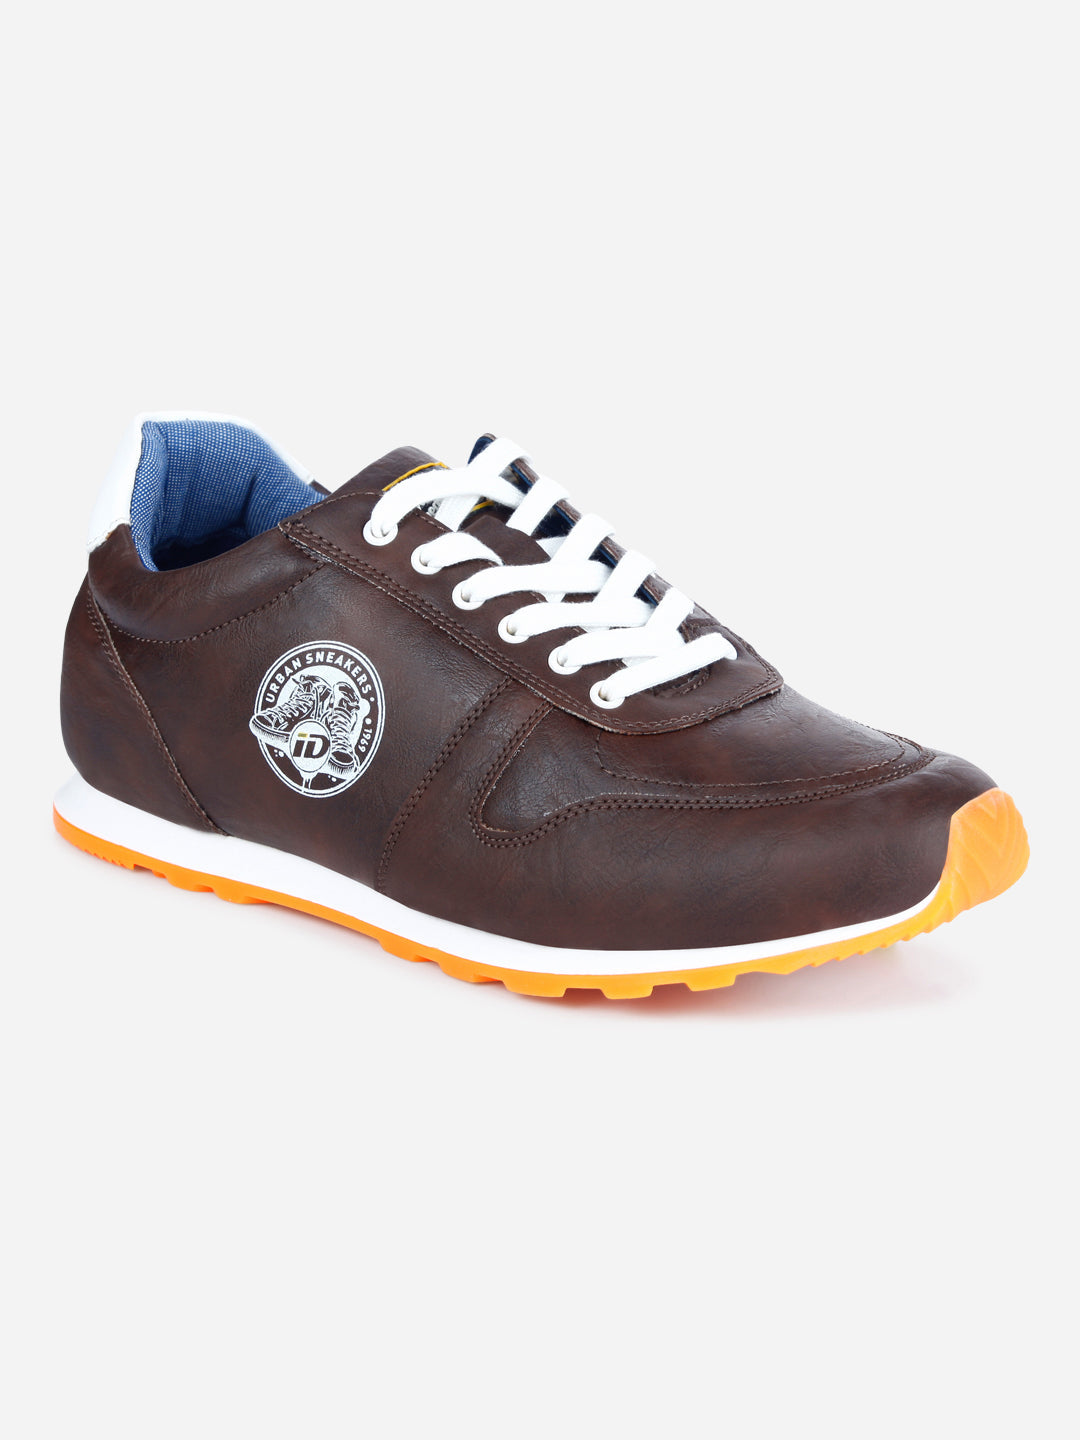 Men's Brown Lace Up Sneaker (ID3054) - Sneakers | Shop at Rs. 2,985 ...